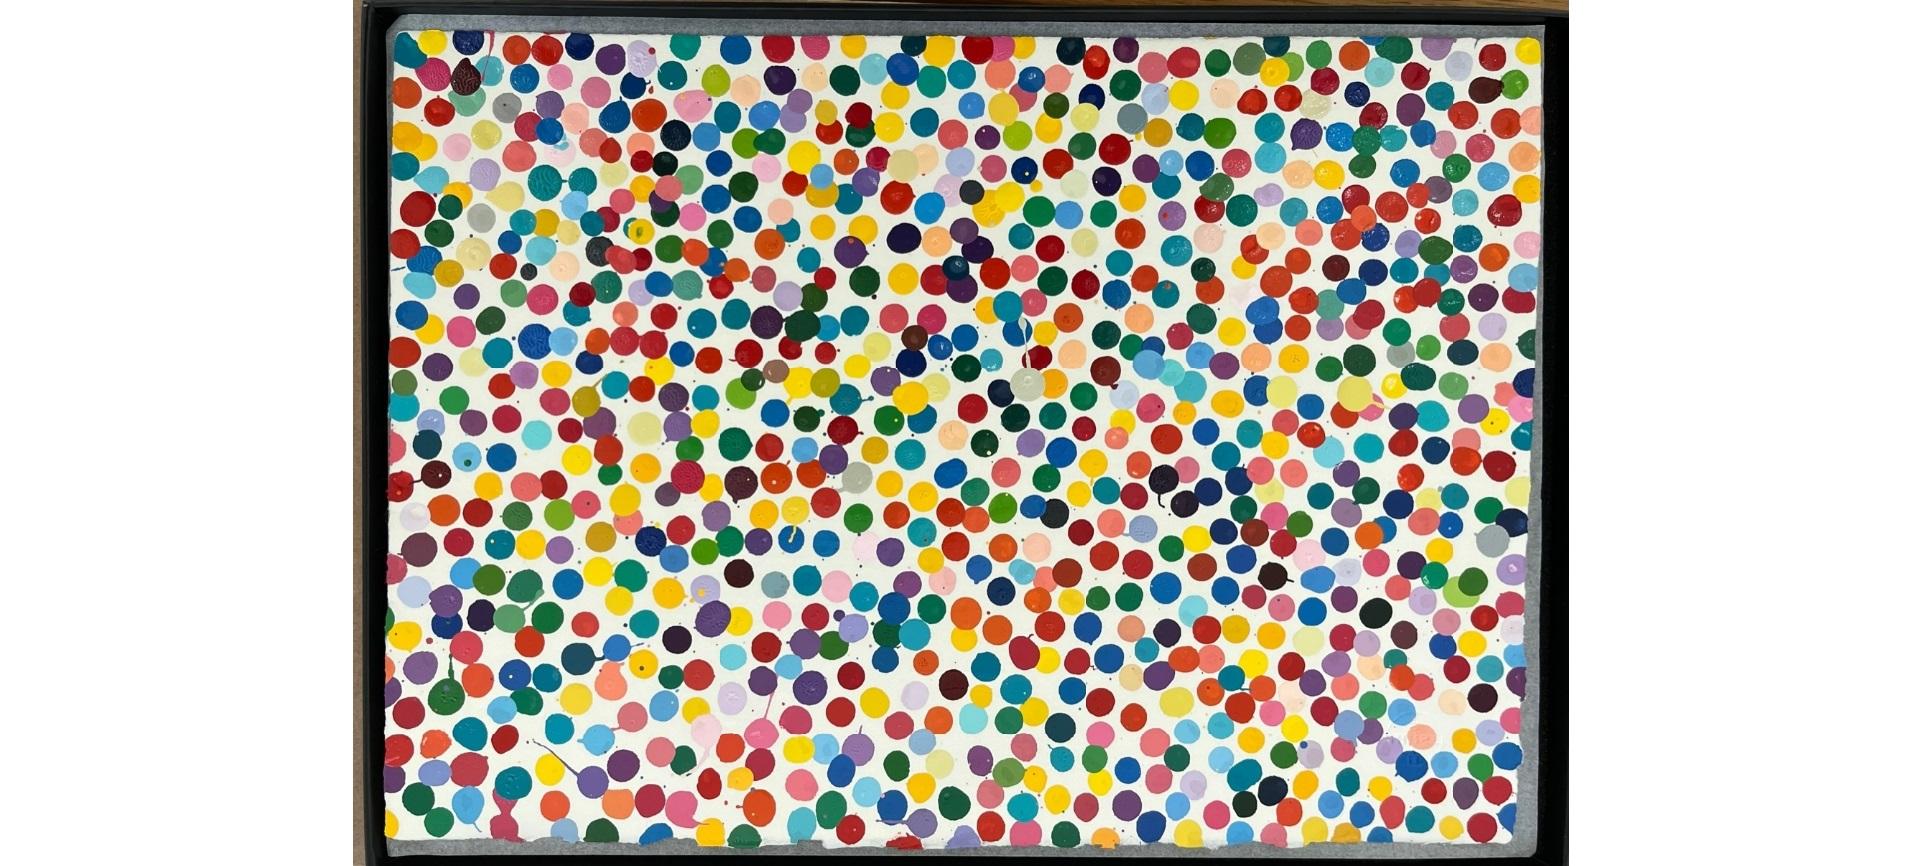 I'm Home Tonight, Painting by Damien Hirst, 2016